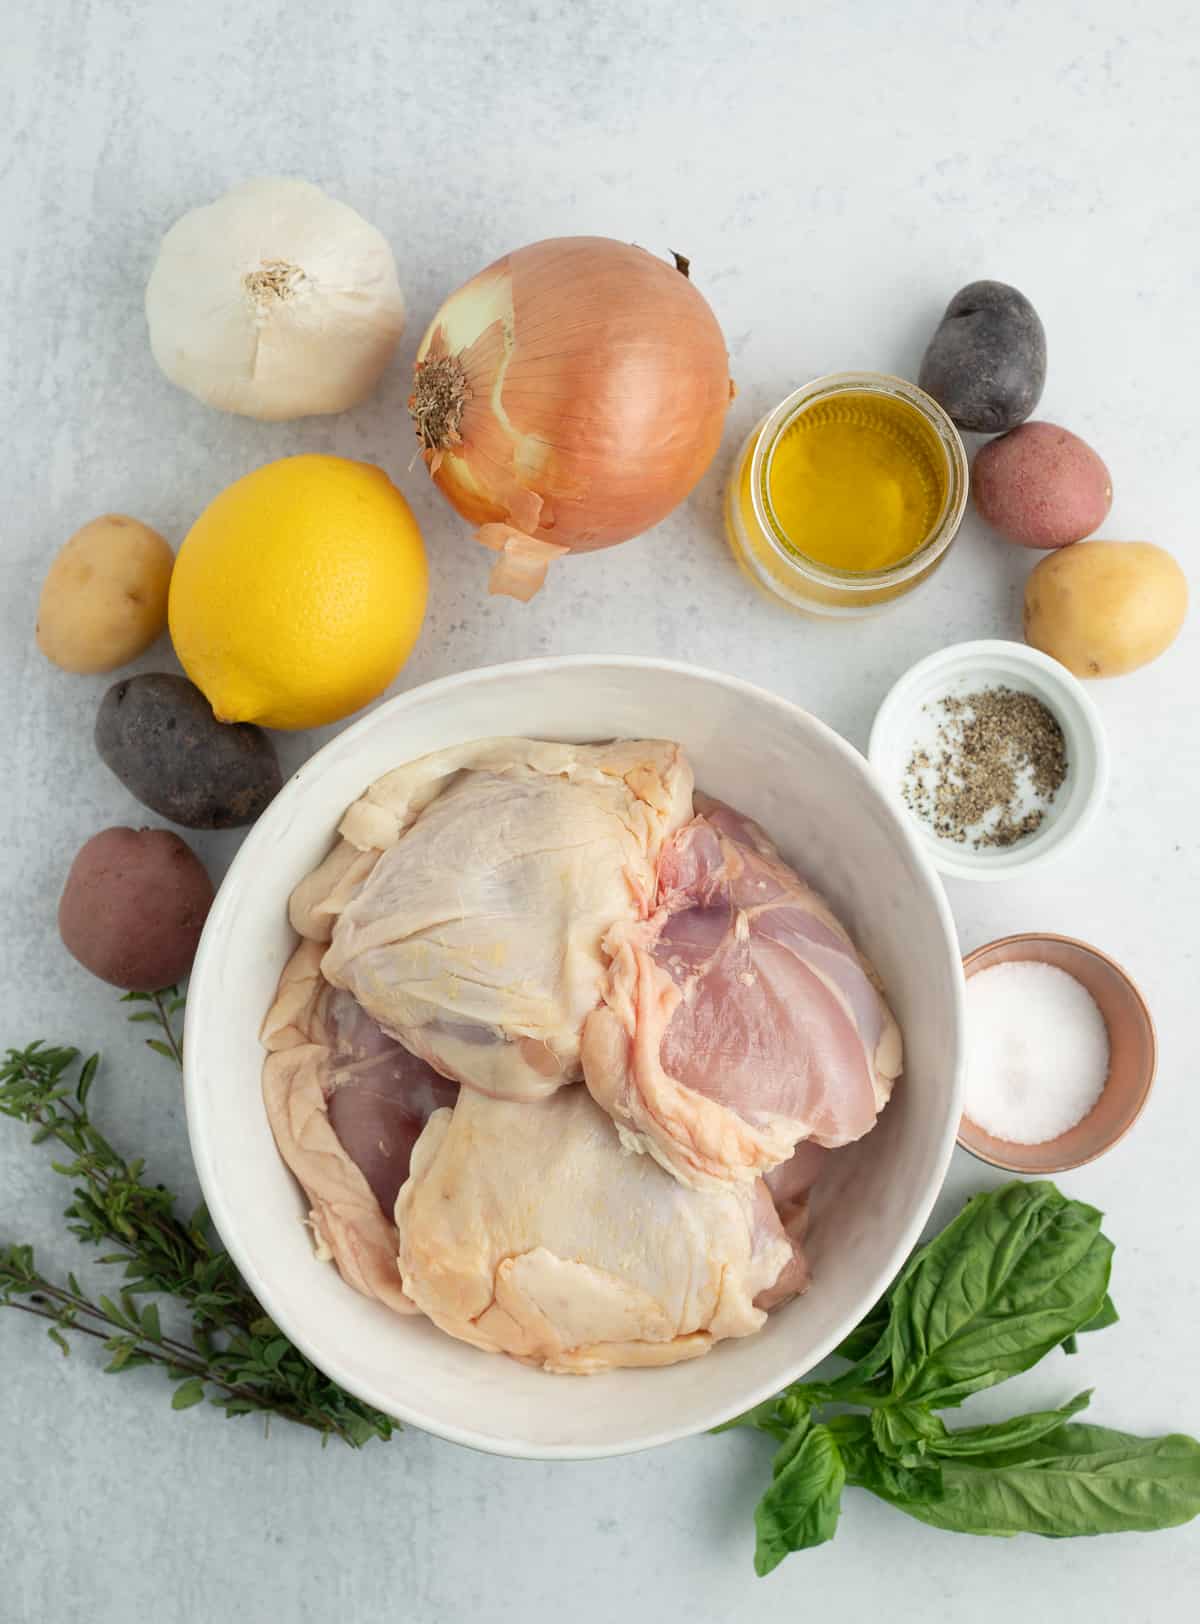 a white bowl of raw chicken thighs on a grey board with lemons, herbs, potatoes, and other ingredients.